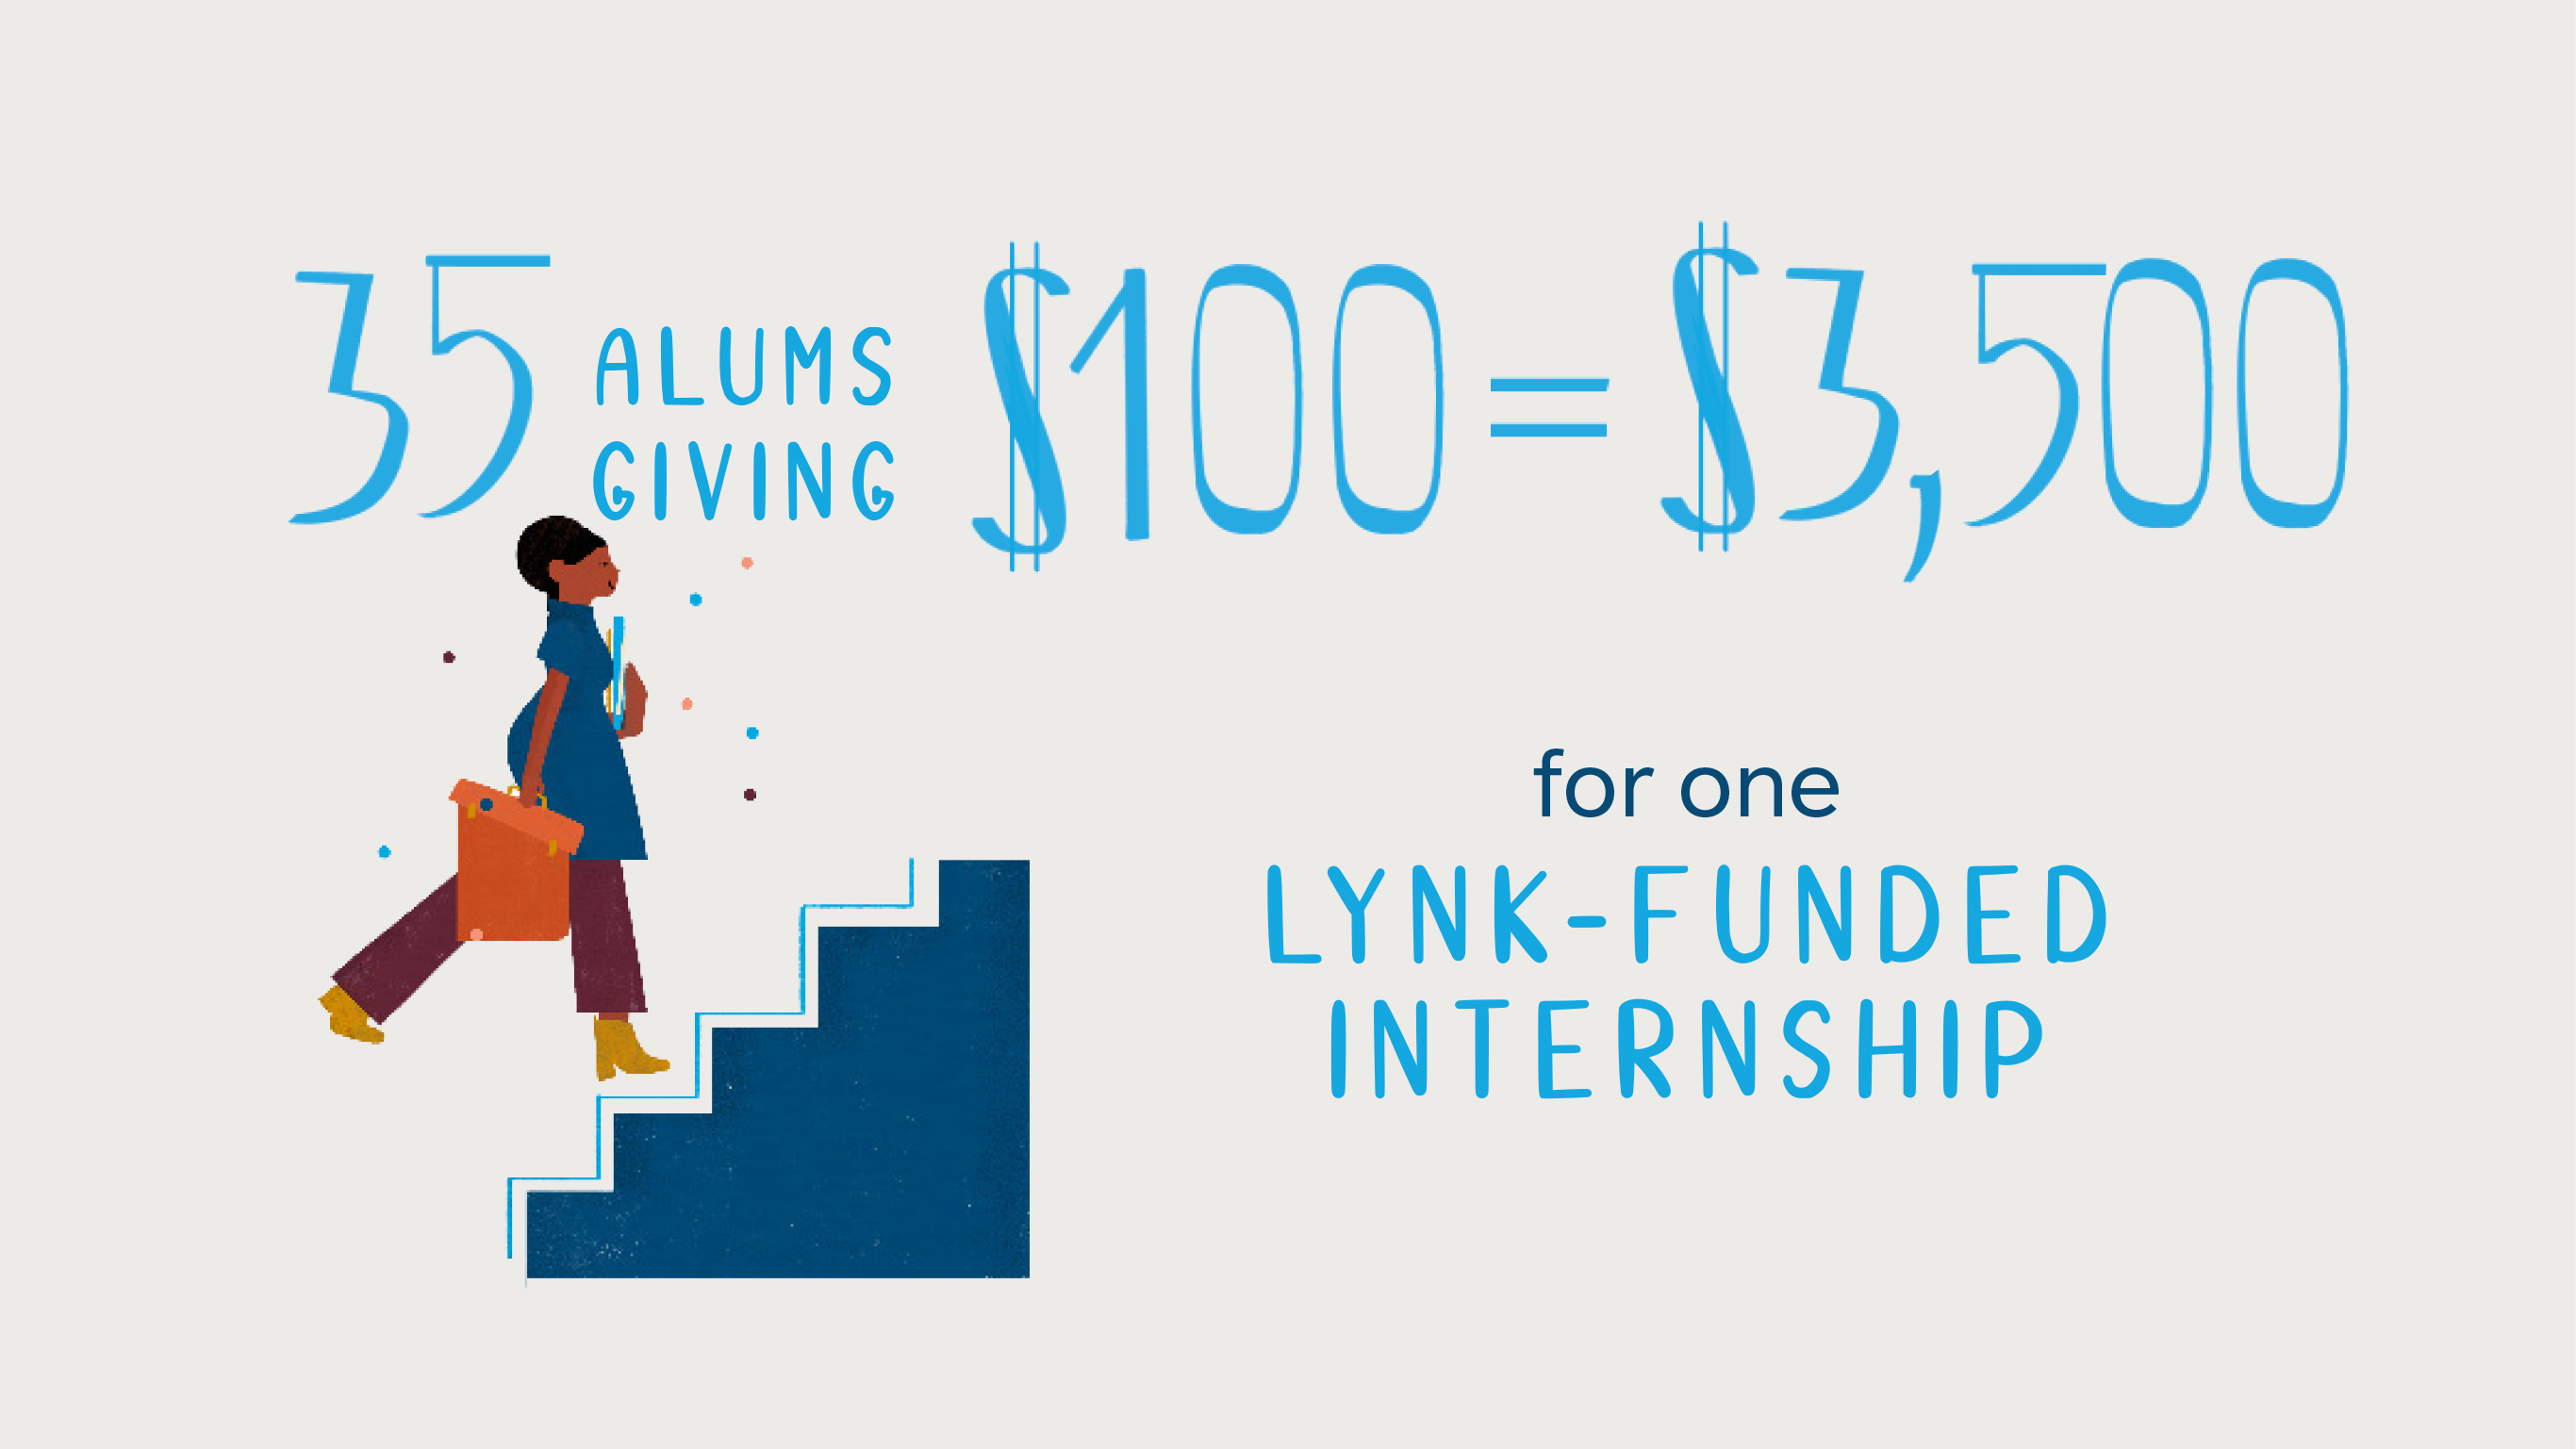 35 alums giving $100 = $3,500 for one Lynk-funded internship